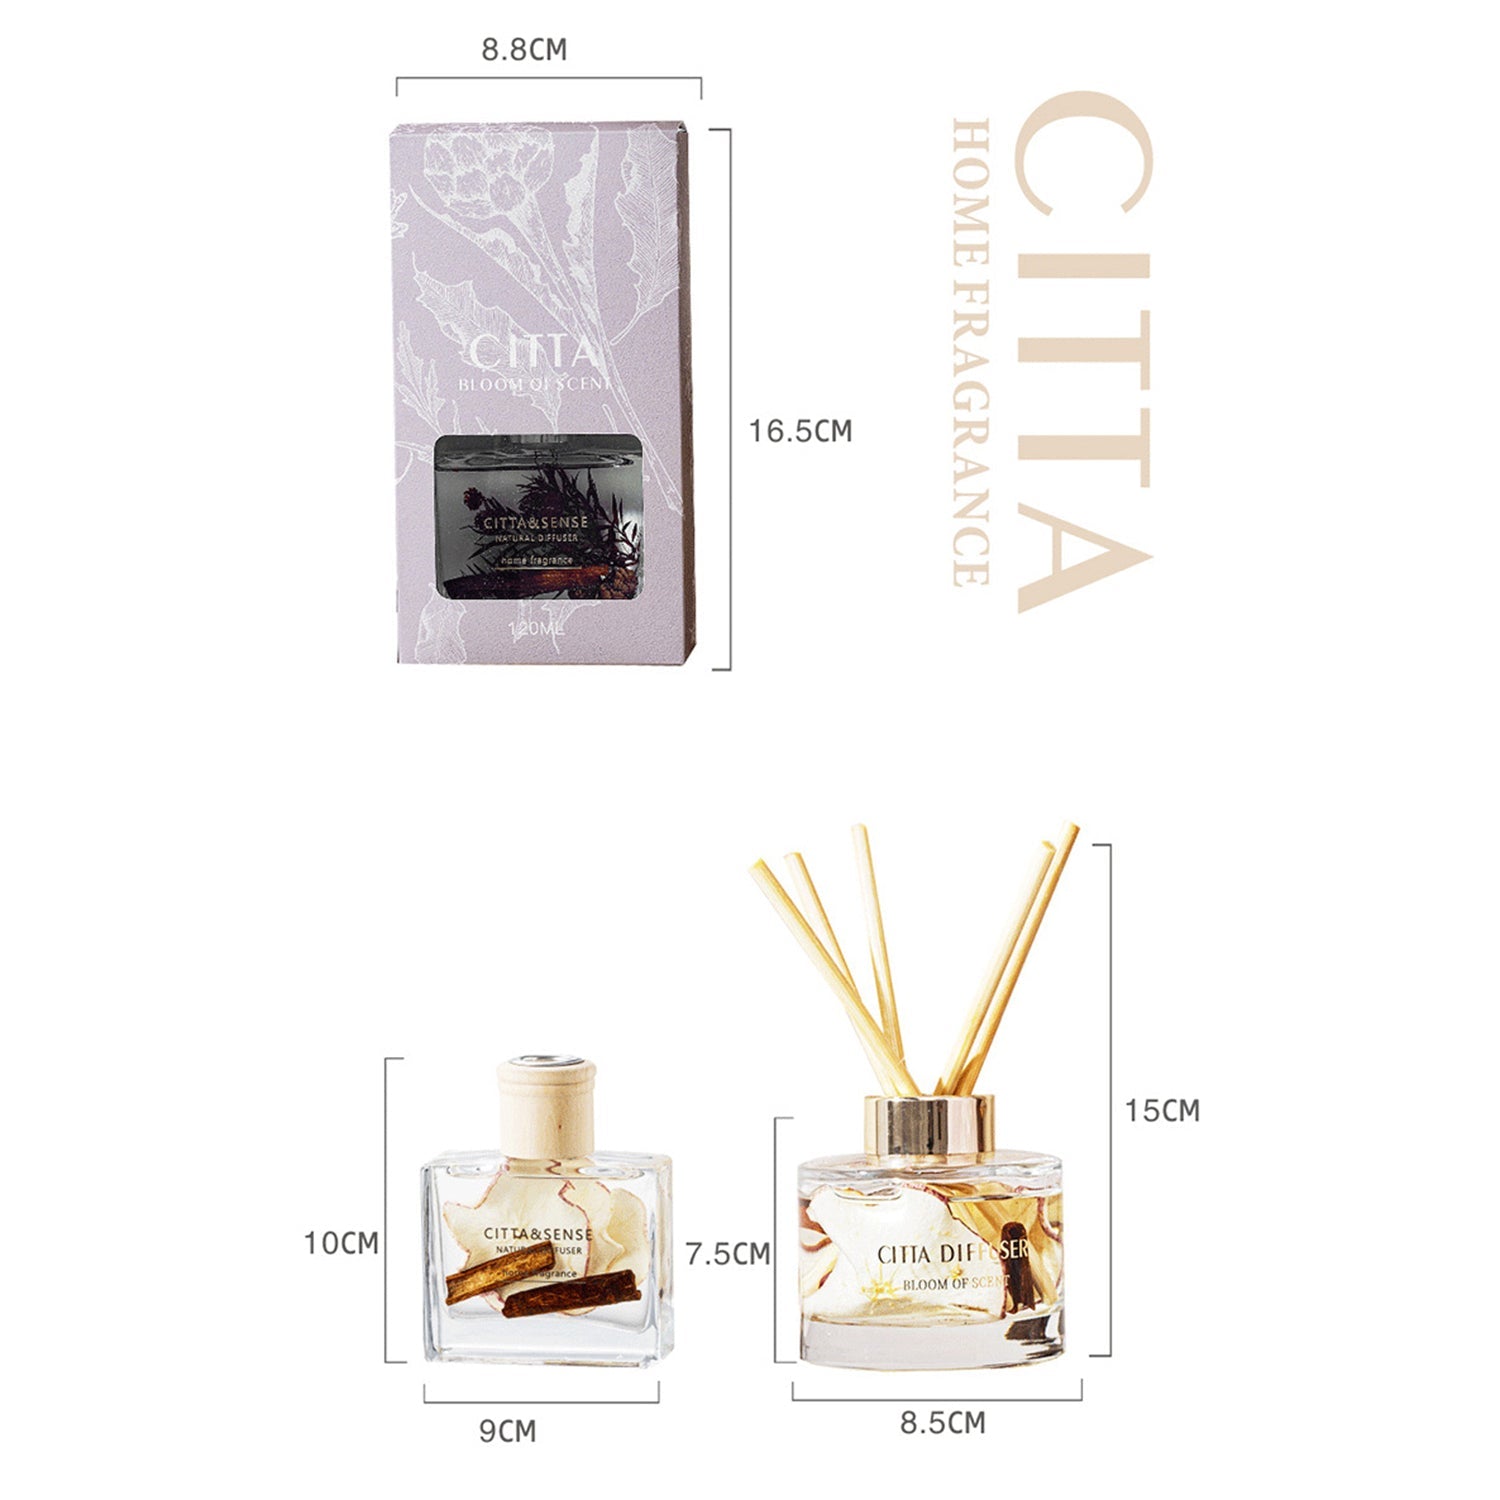 CITTA Fruity Winter Series Reed Diffuser Aromatherapy 120ML Premium Essential Oil with Reed Stick and Dry Fruit Reed Diffuser CITTA 